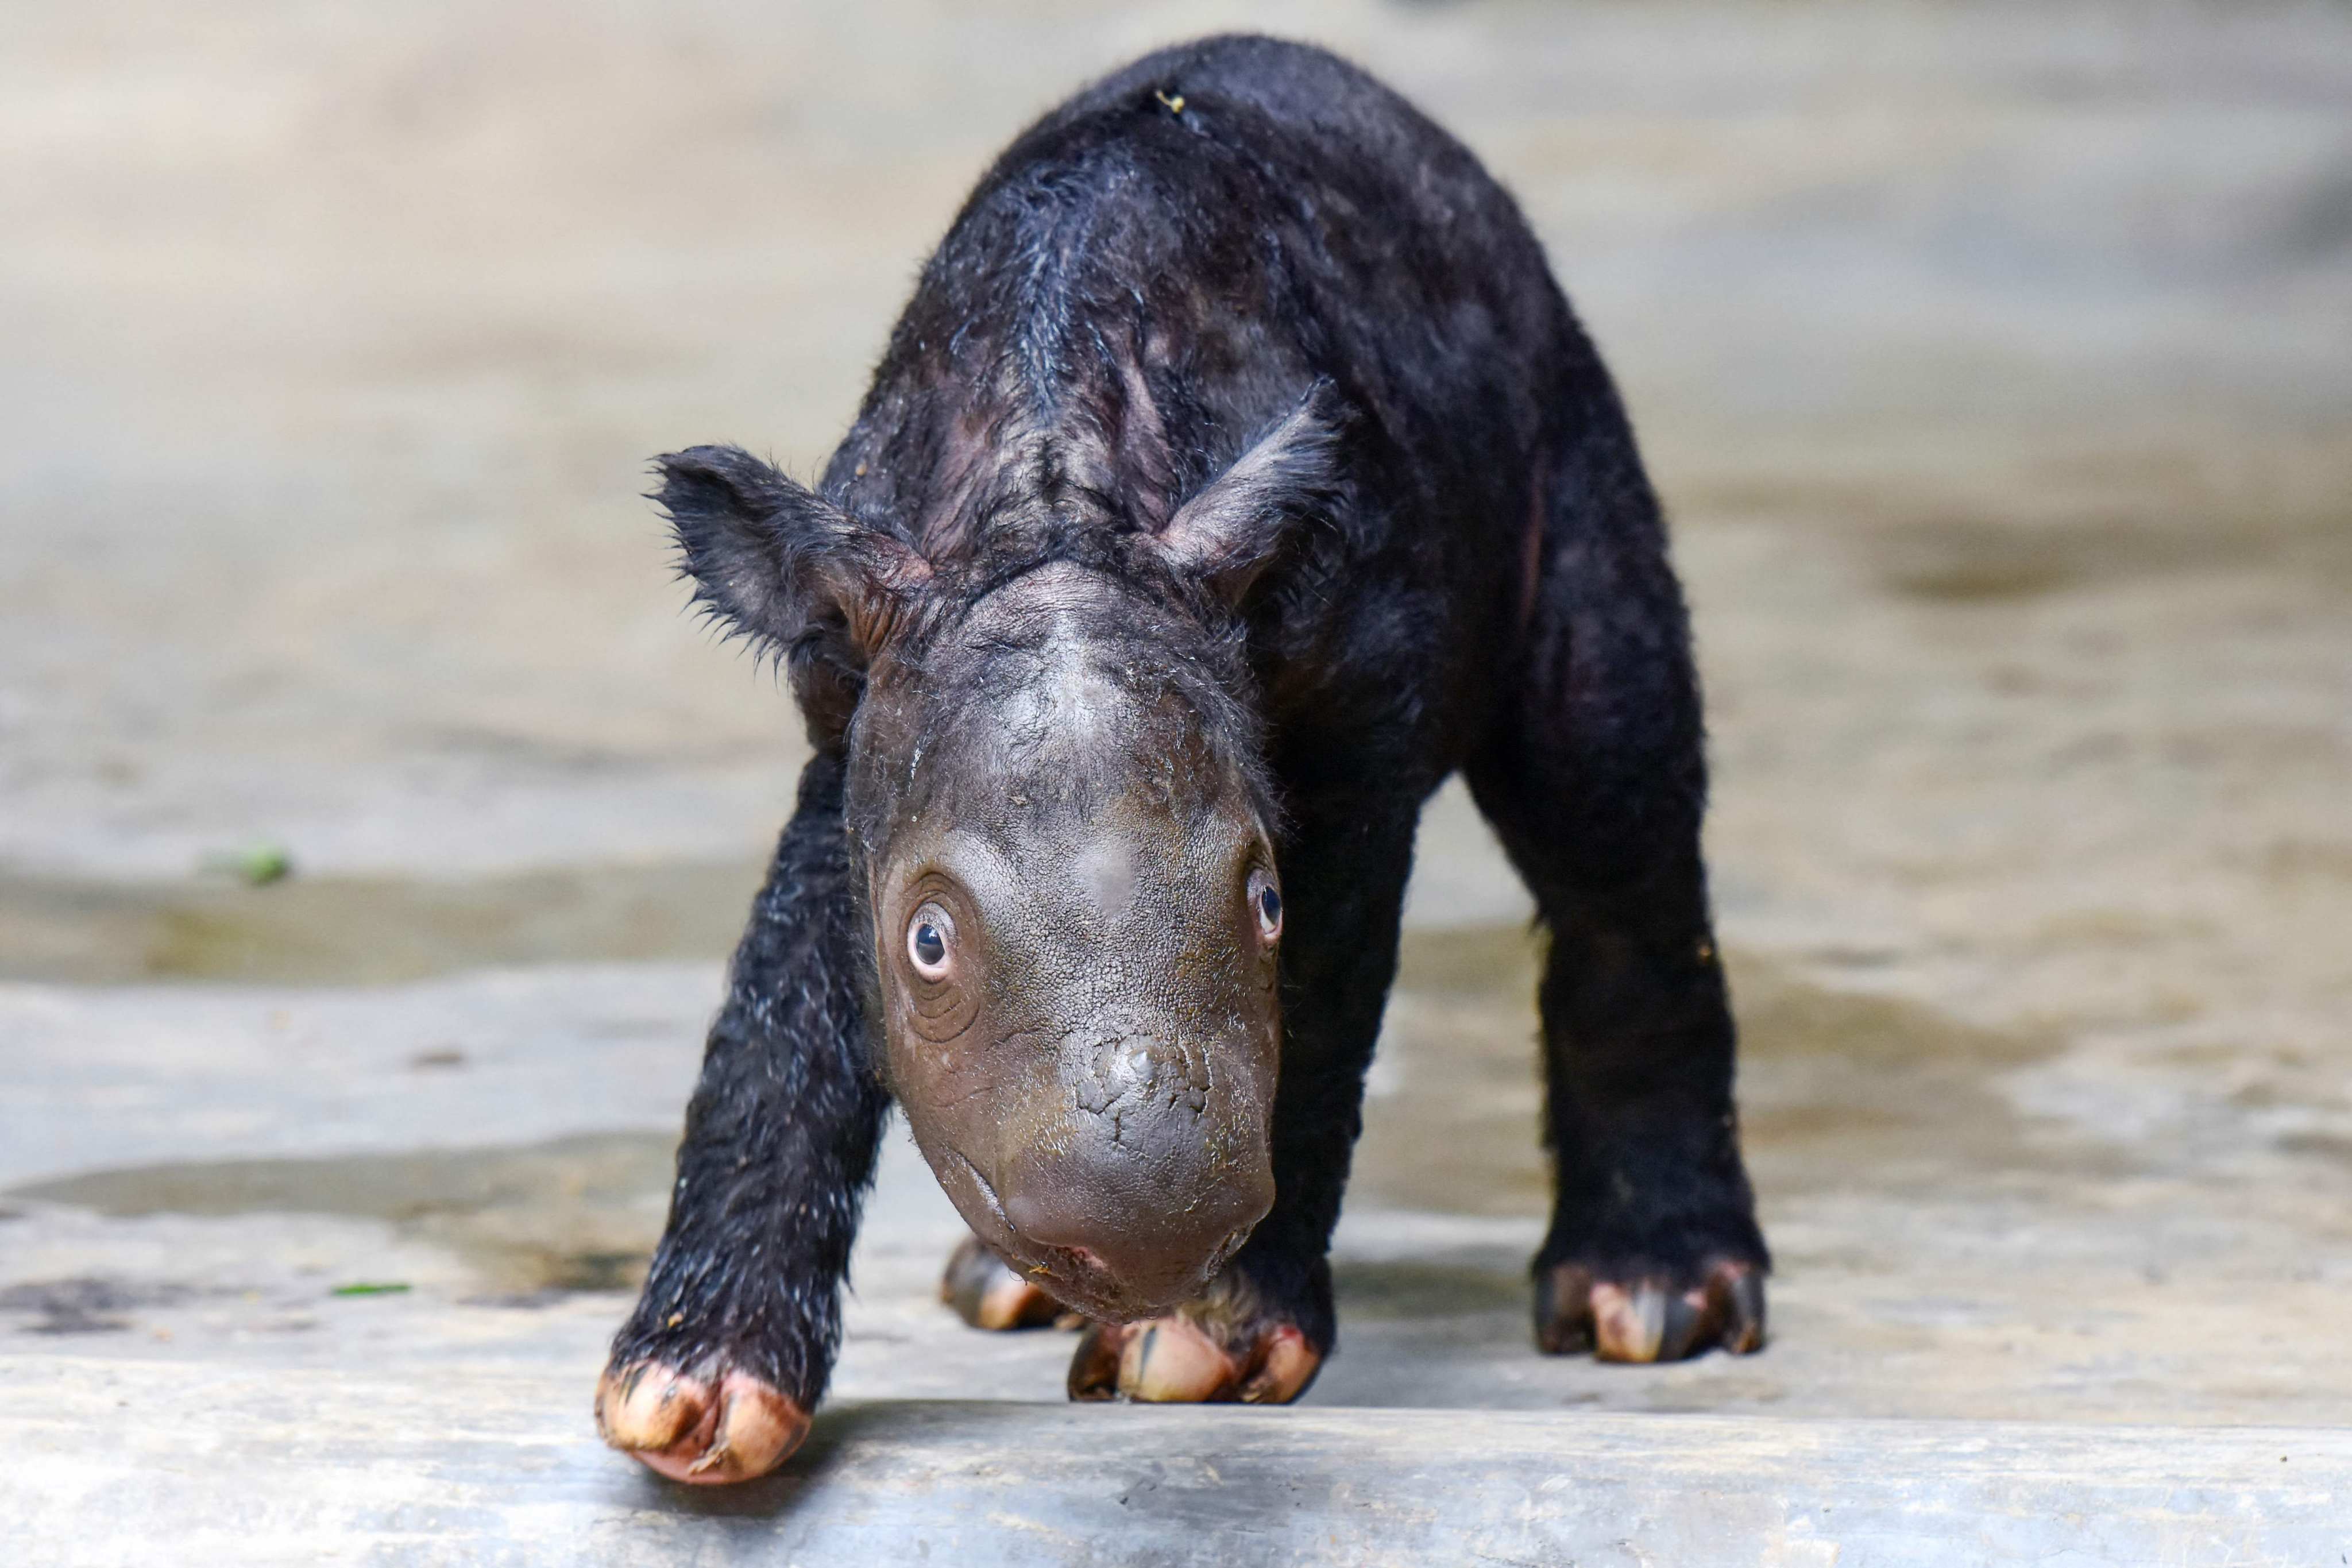 The two-day-old Sumatran rhino calf who was born to 7-year-old female rhino Delilah at the Way Kambas National Park rhino sanctuary in Lampung province. Photo: Indonesian Ministry of Environment and Forestry Handout via AFP